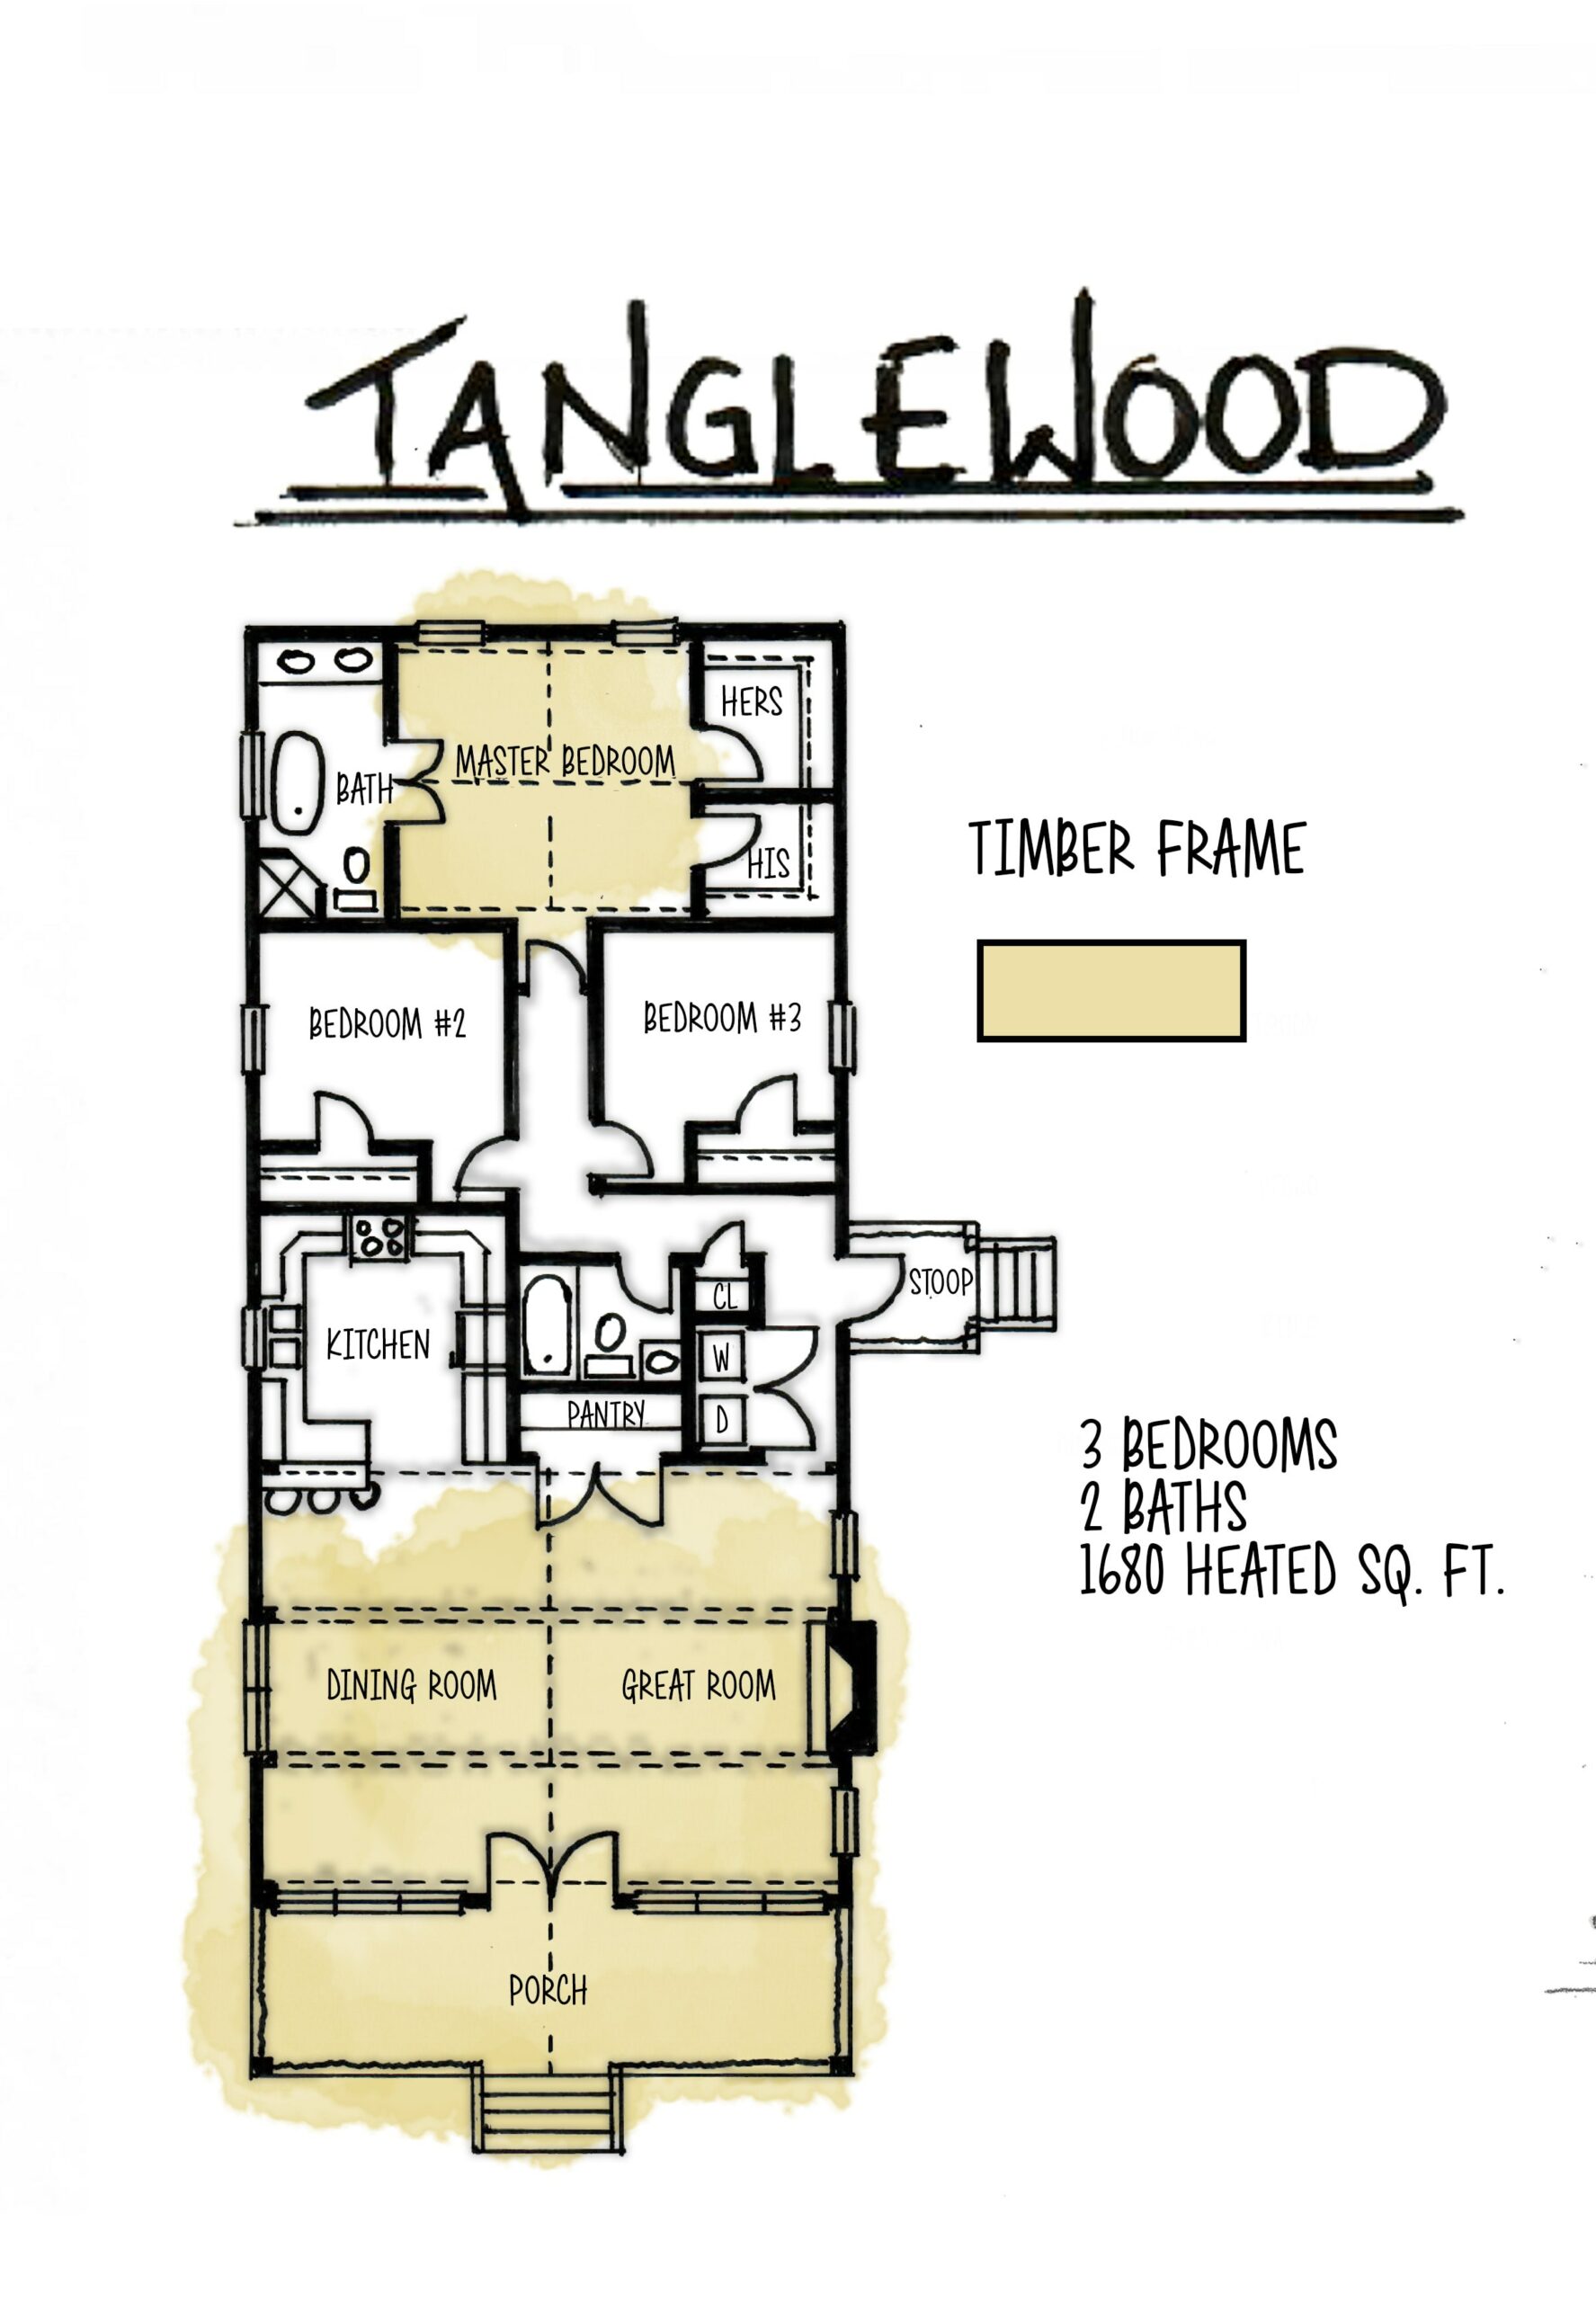 September 2017 Design of the Month "Tanglewood" $90,637 tangle wood floor plan scaled Hearthstone Homes